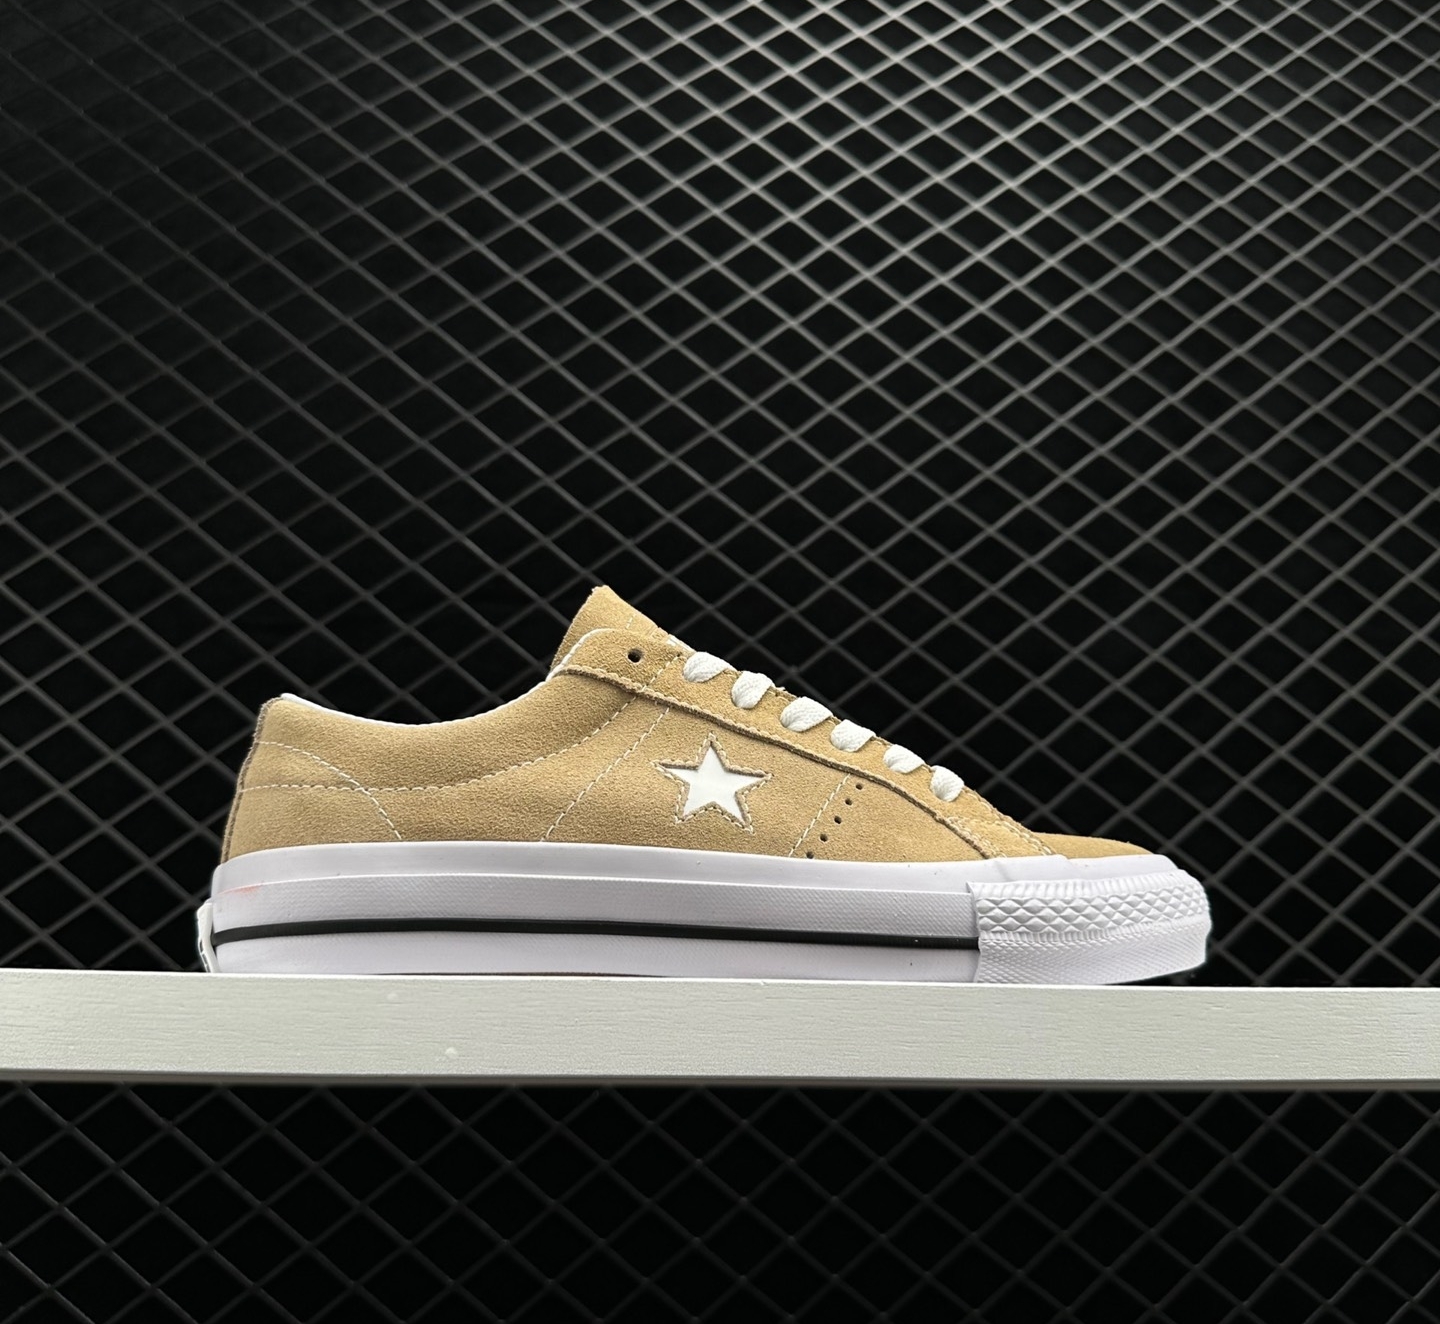 Converse One Star Pro Ox Oat Milk White Black A04155C - Stylish and Versatile Sneakers